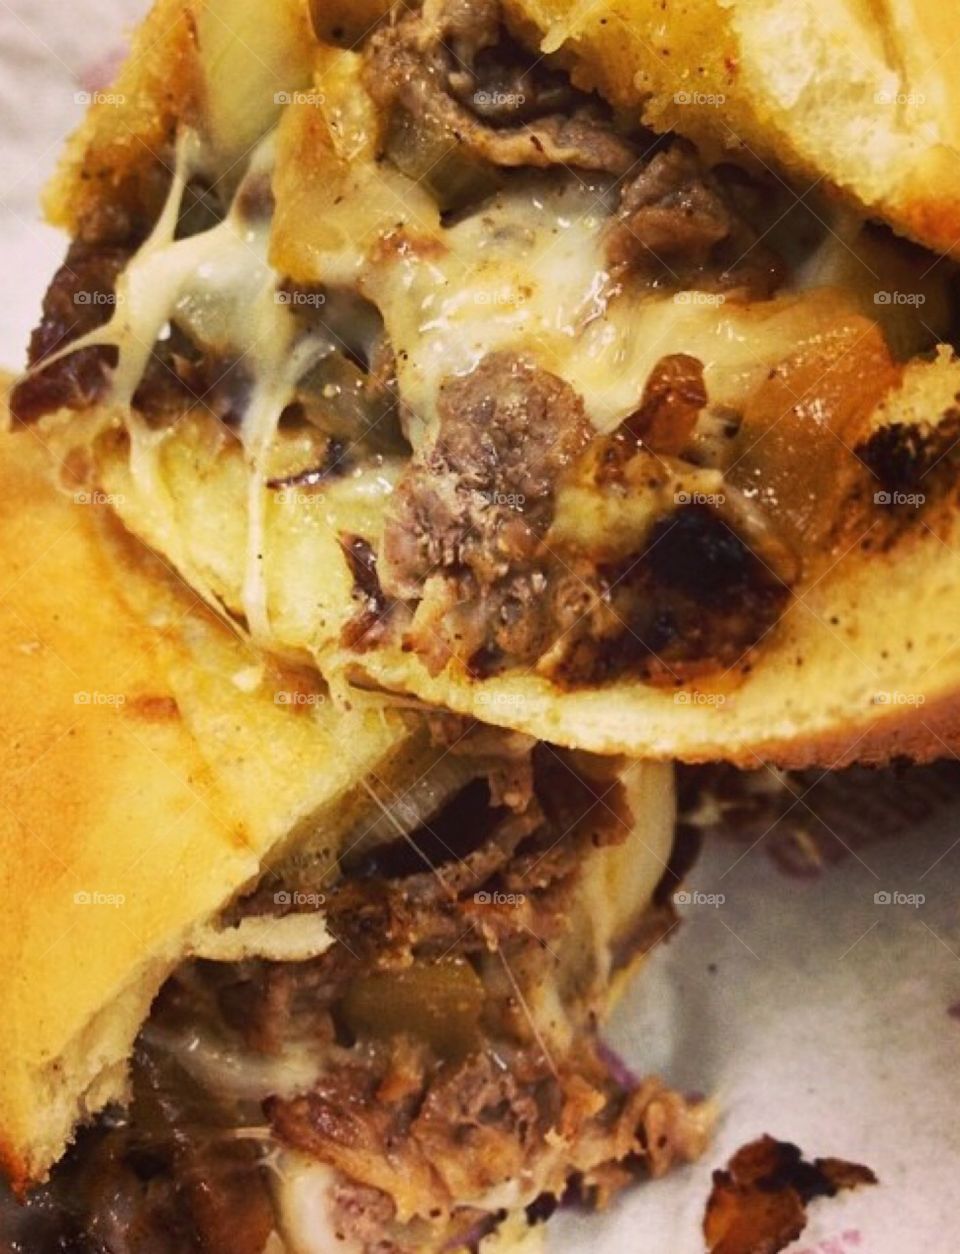 Steak and cheese